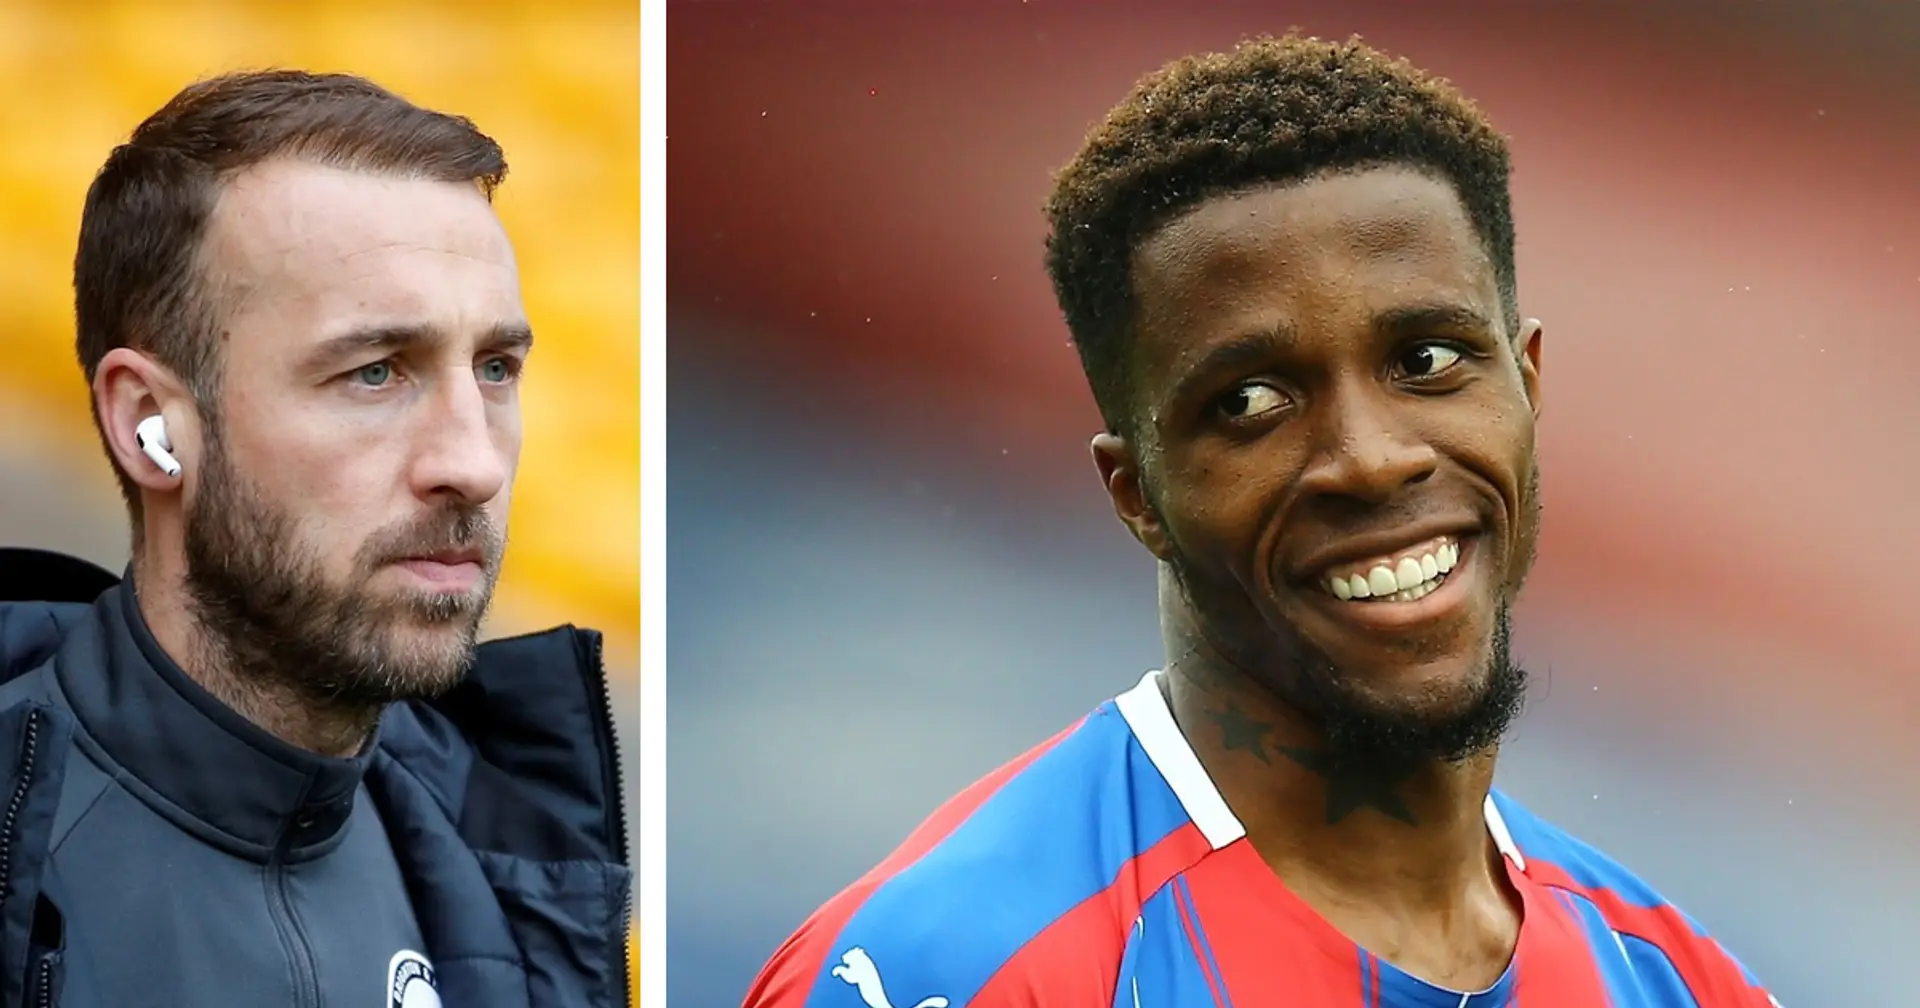 'It baffled me why they didn't go for him last year': Zaha's former teammate insists Wilf 'a perfect fit' for Arsenal